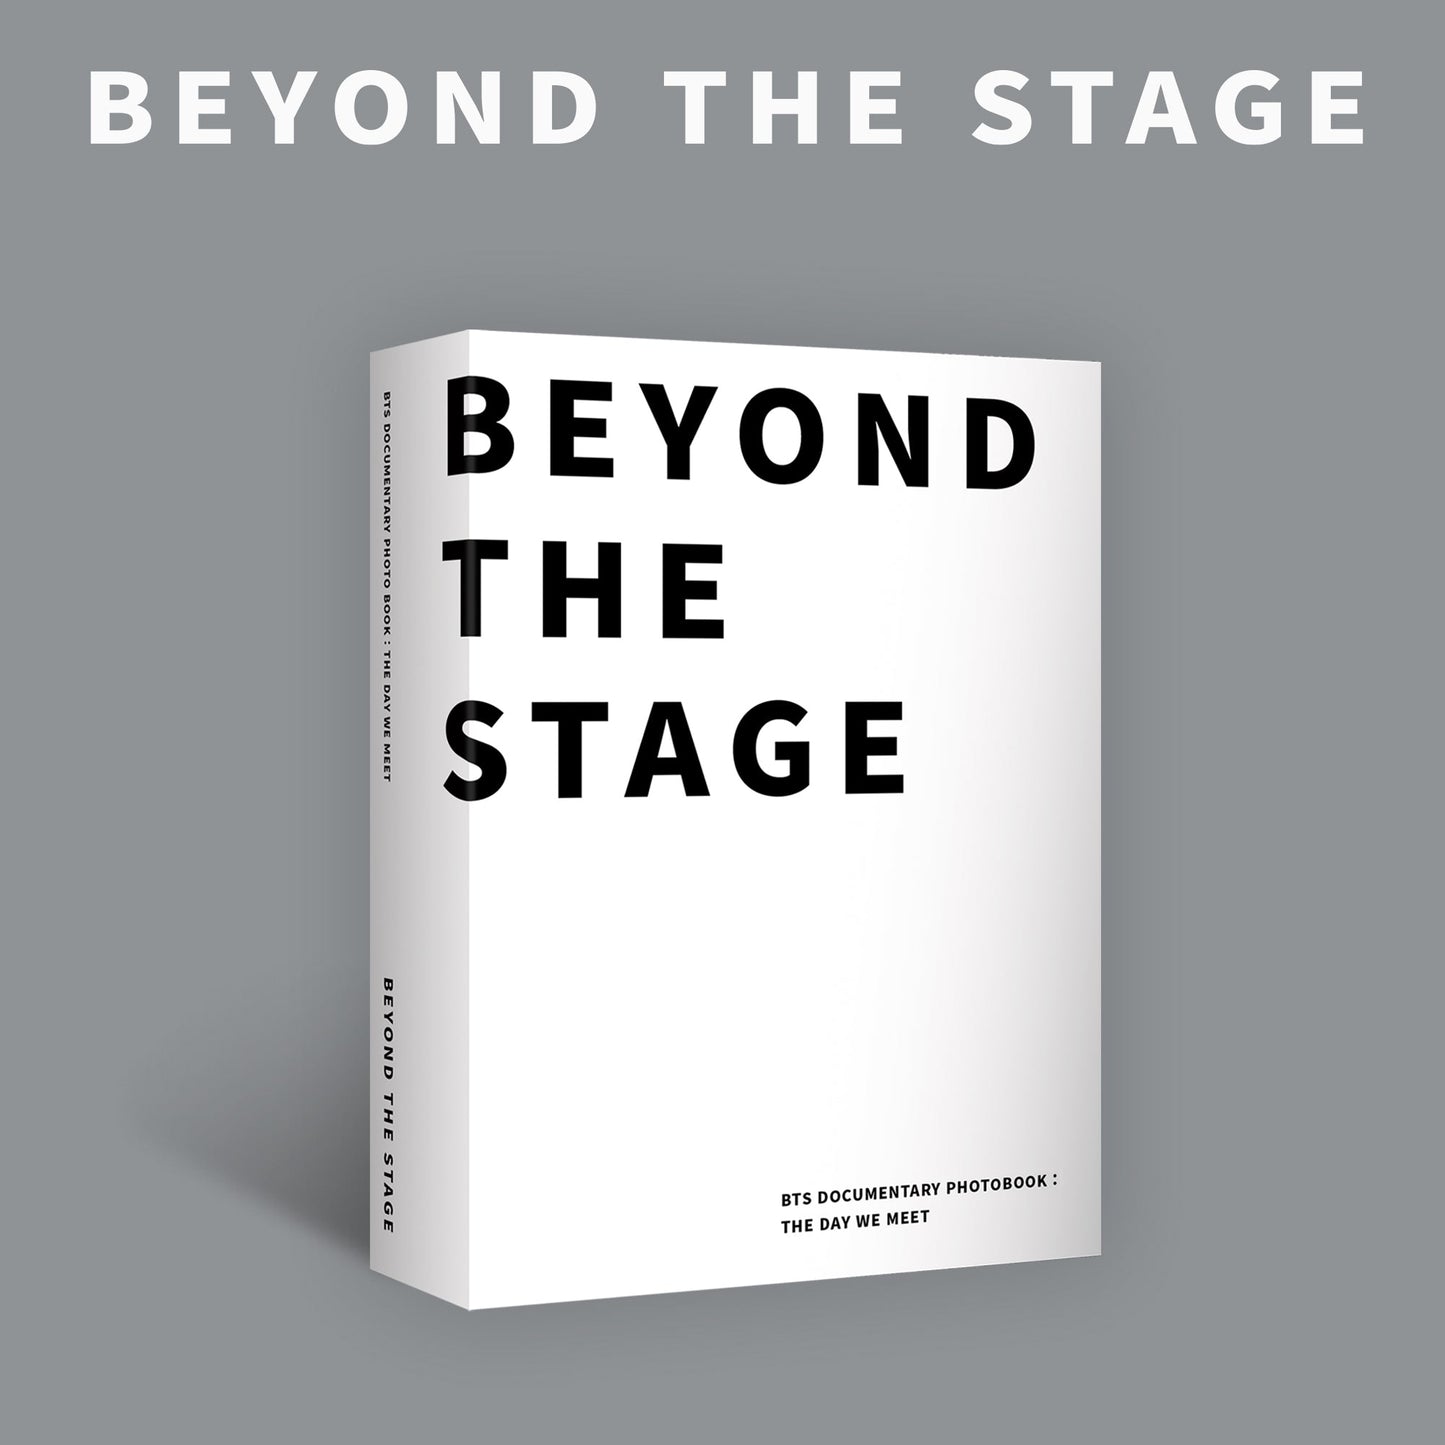 BTS BEYOND THE STAGE DOCUMENTARY PHOTOBOOK 'THE DAY WE MEET' COVER